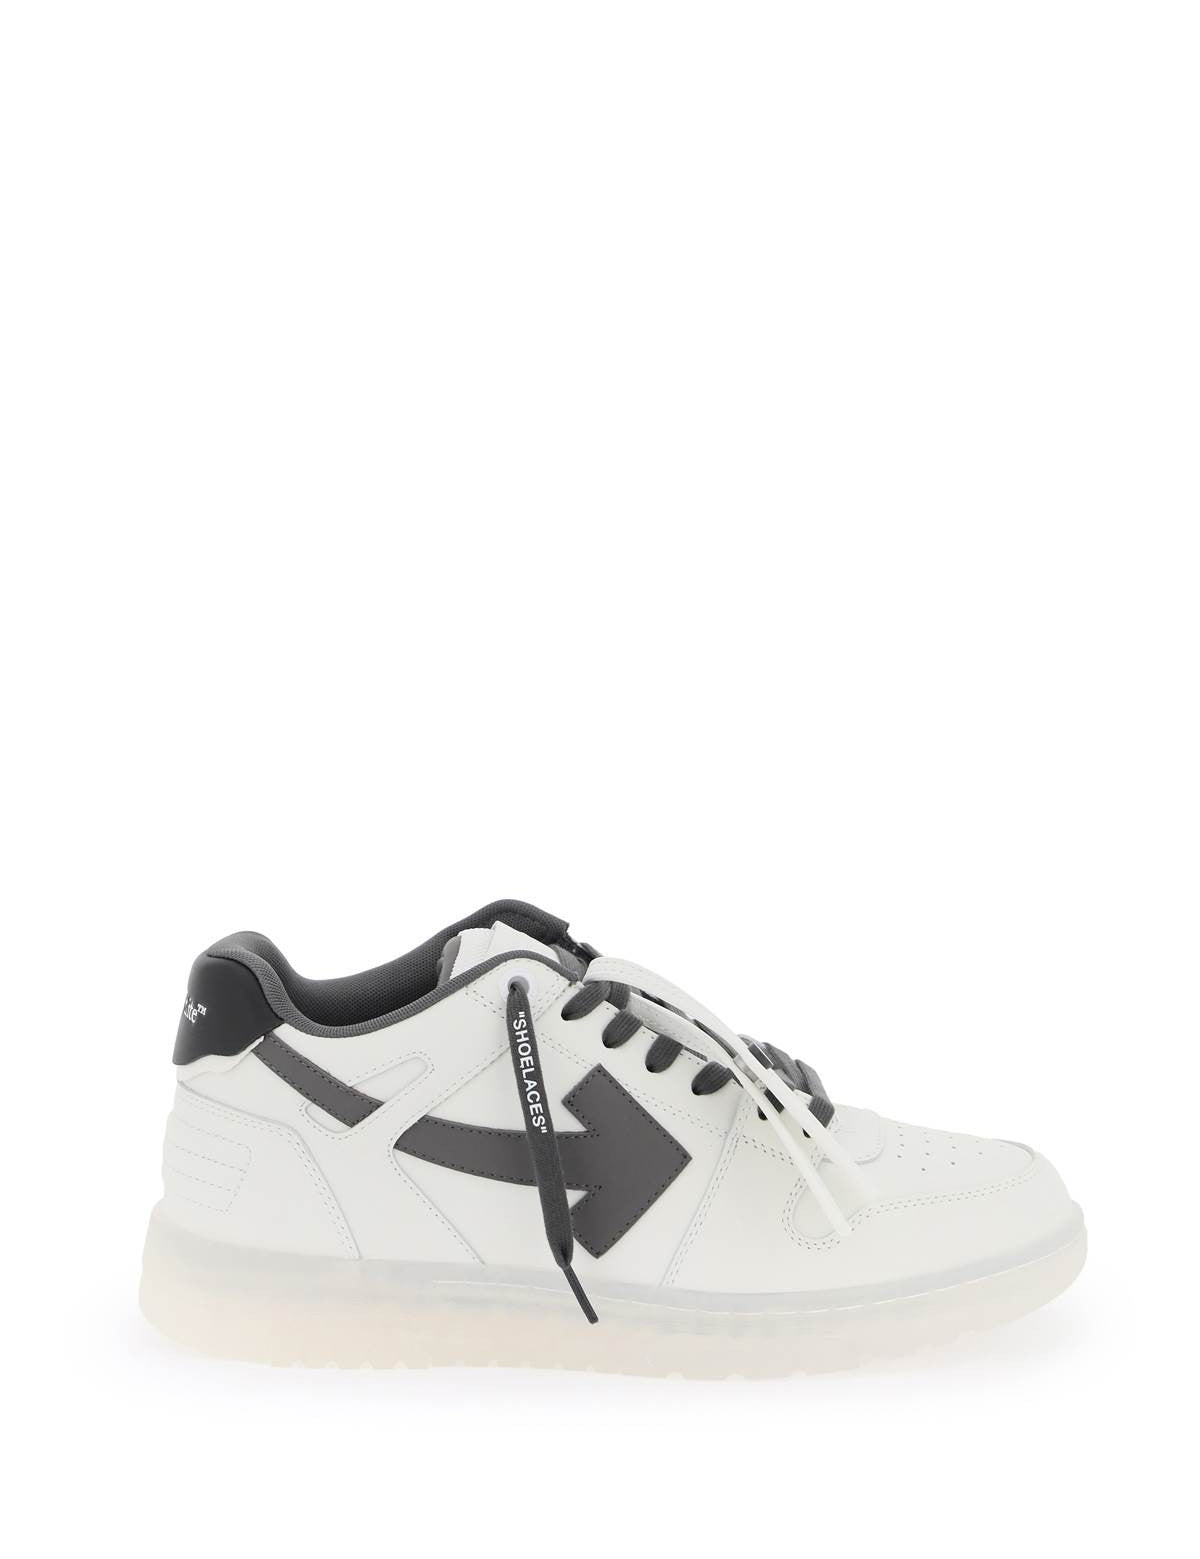 off-white-out-of-office-sneakers_38abd935-c4db-431c-a13b-d9c6002b2d2e.jpg